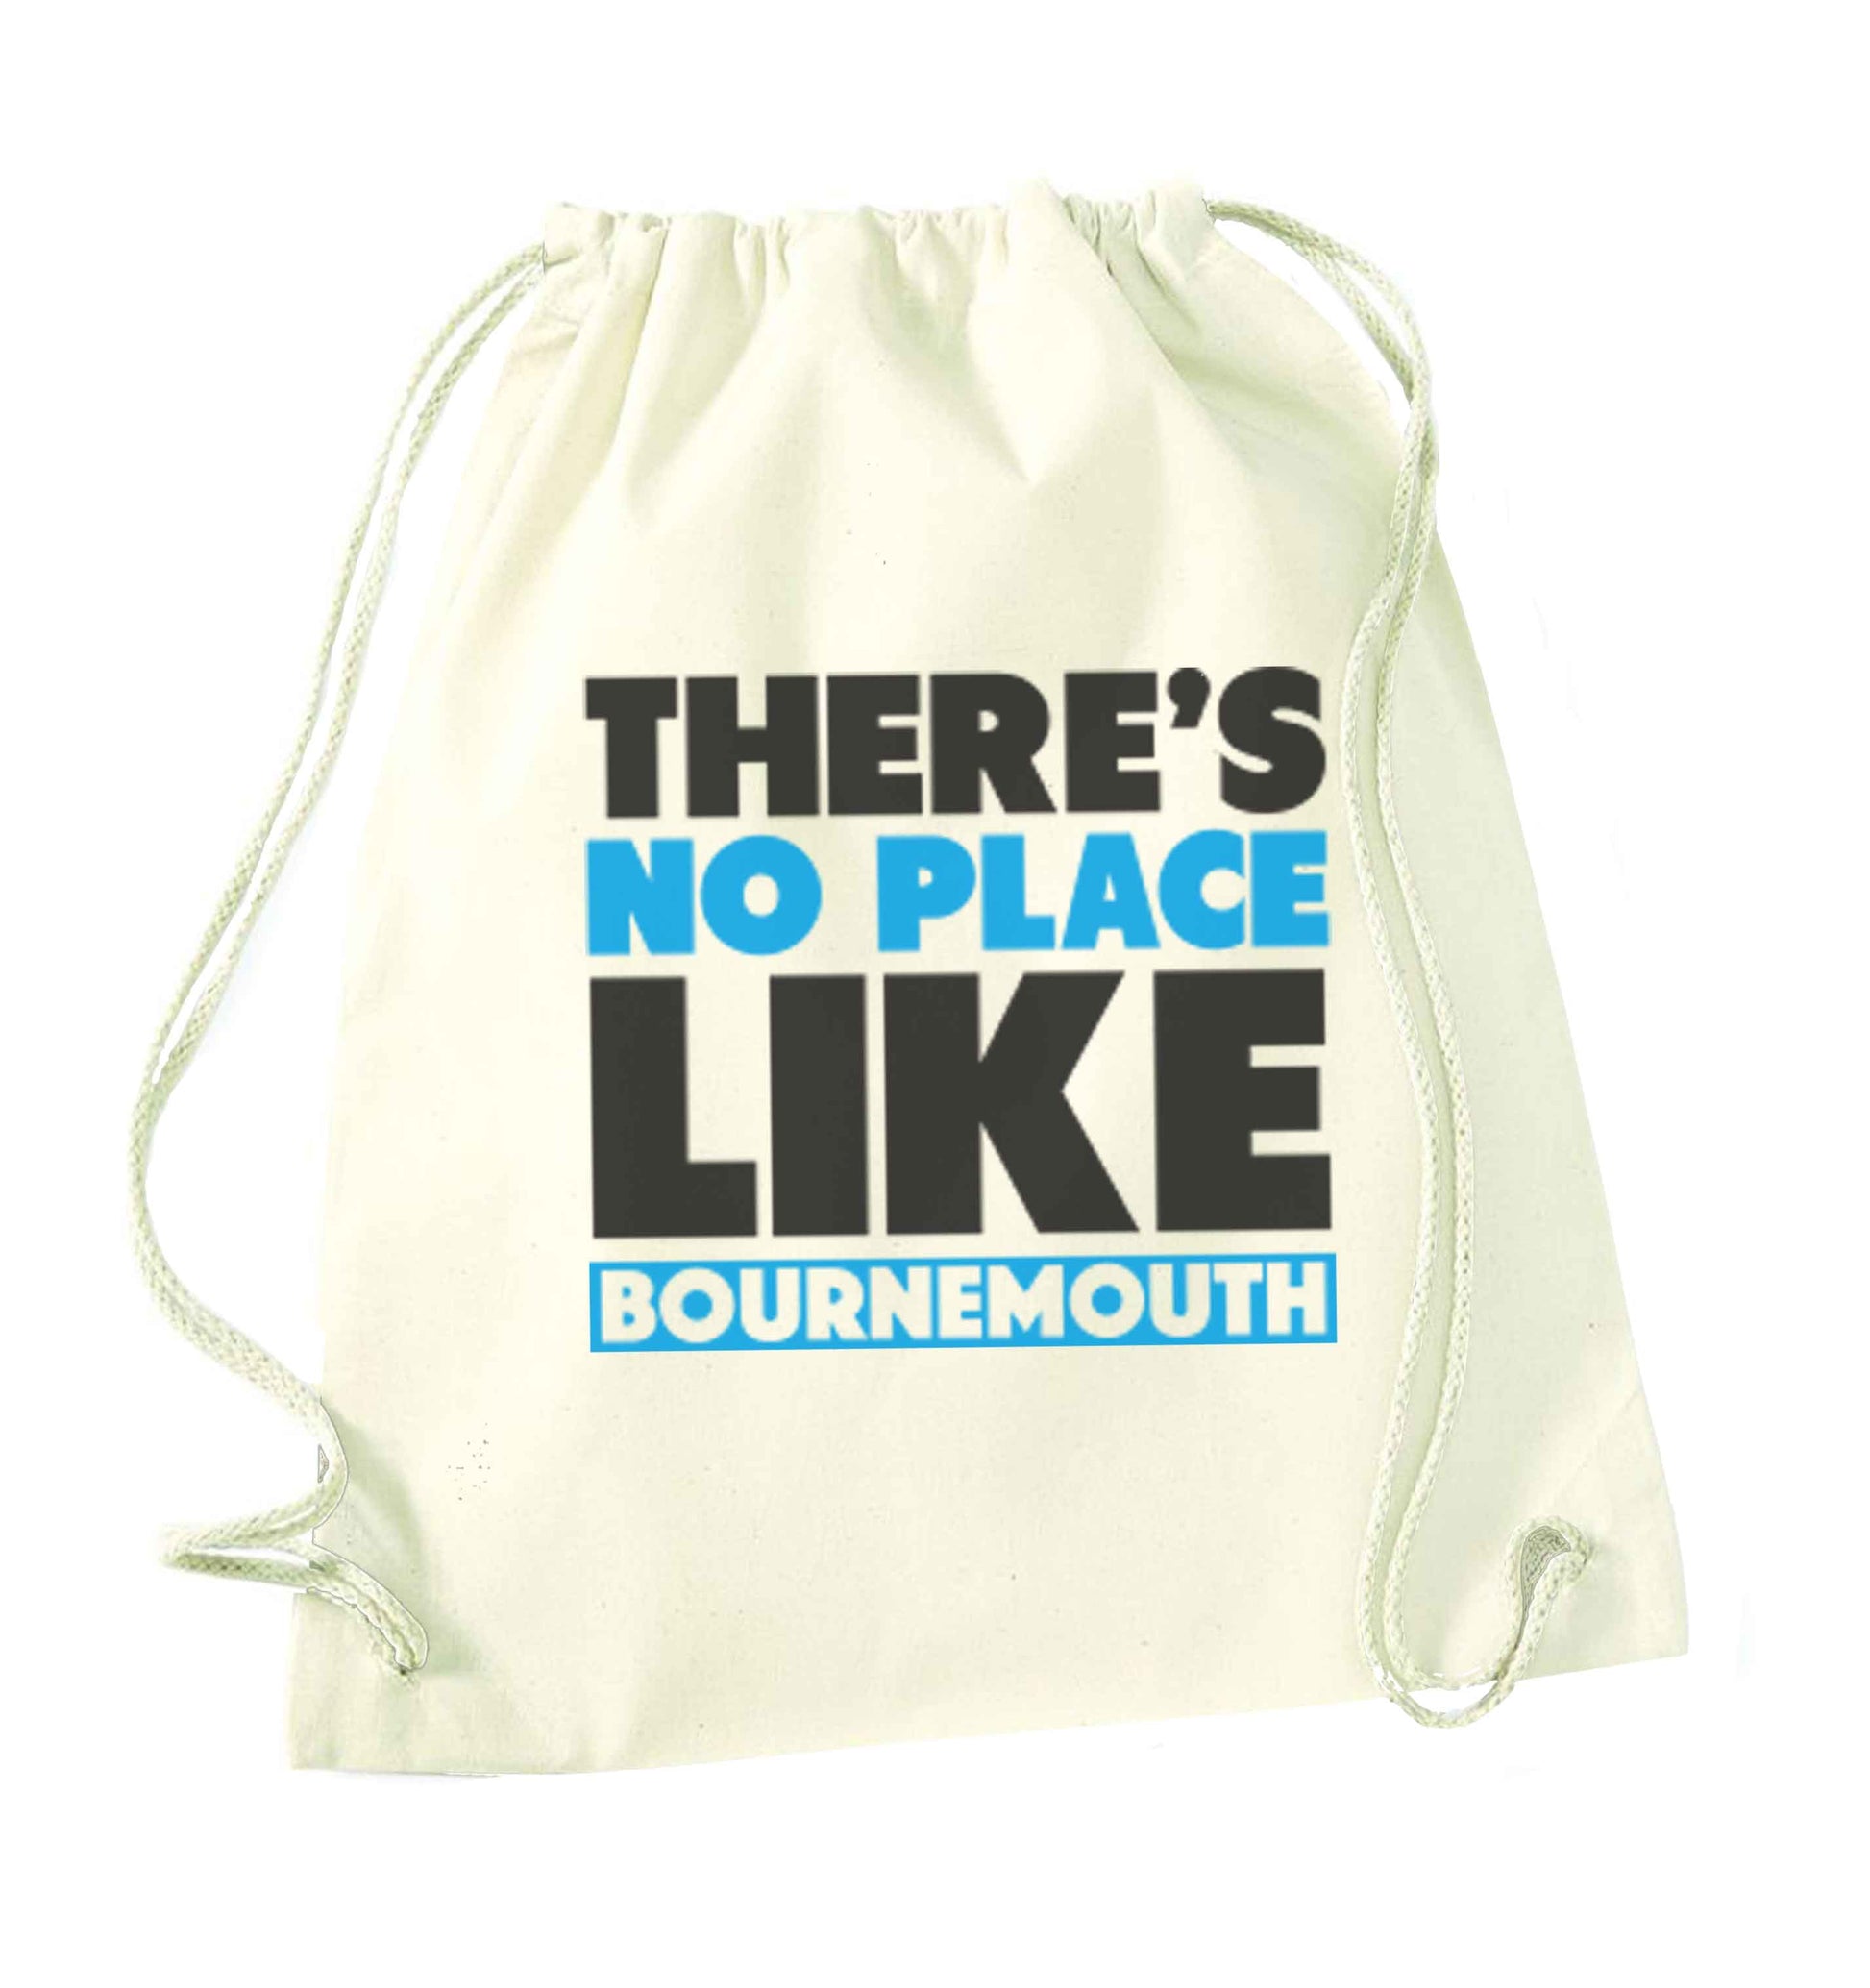 There's no place like Bournemouth natural drawstring bag